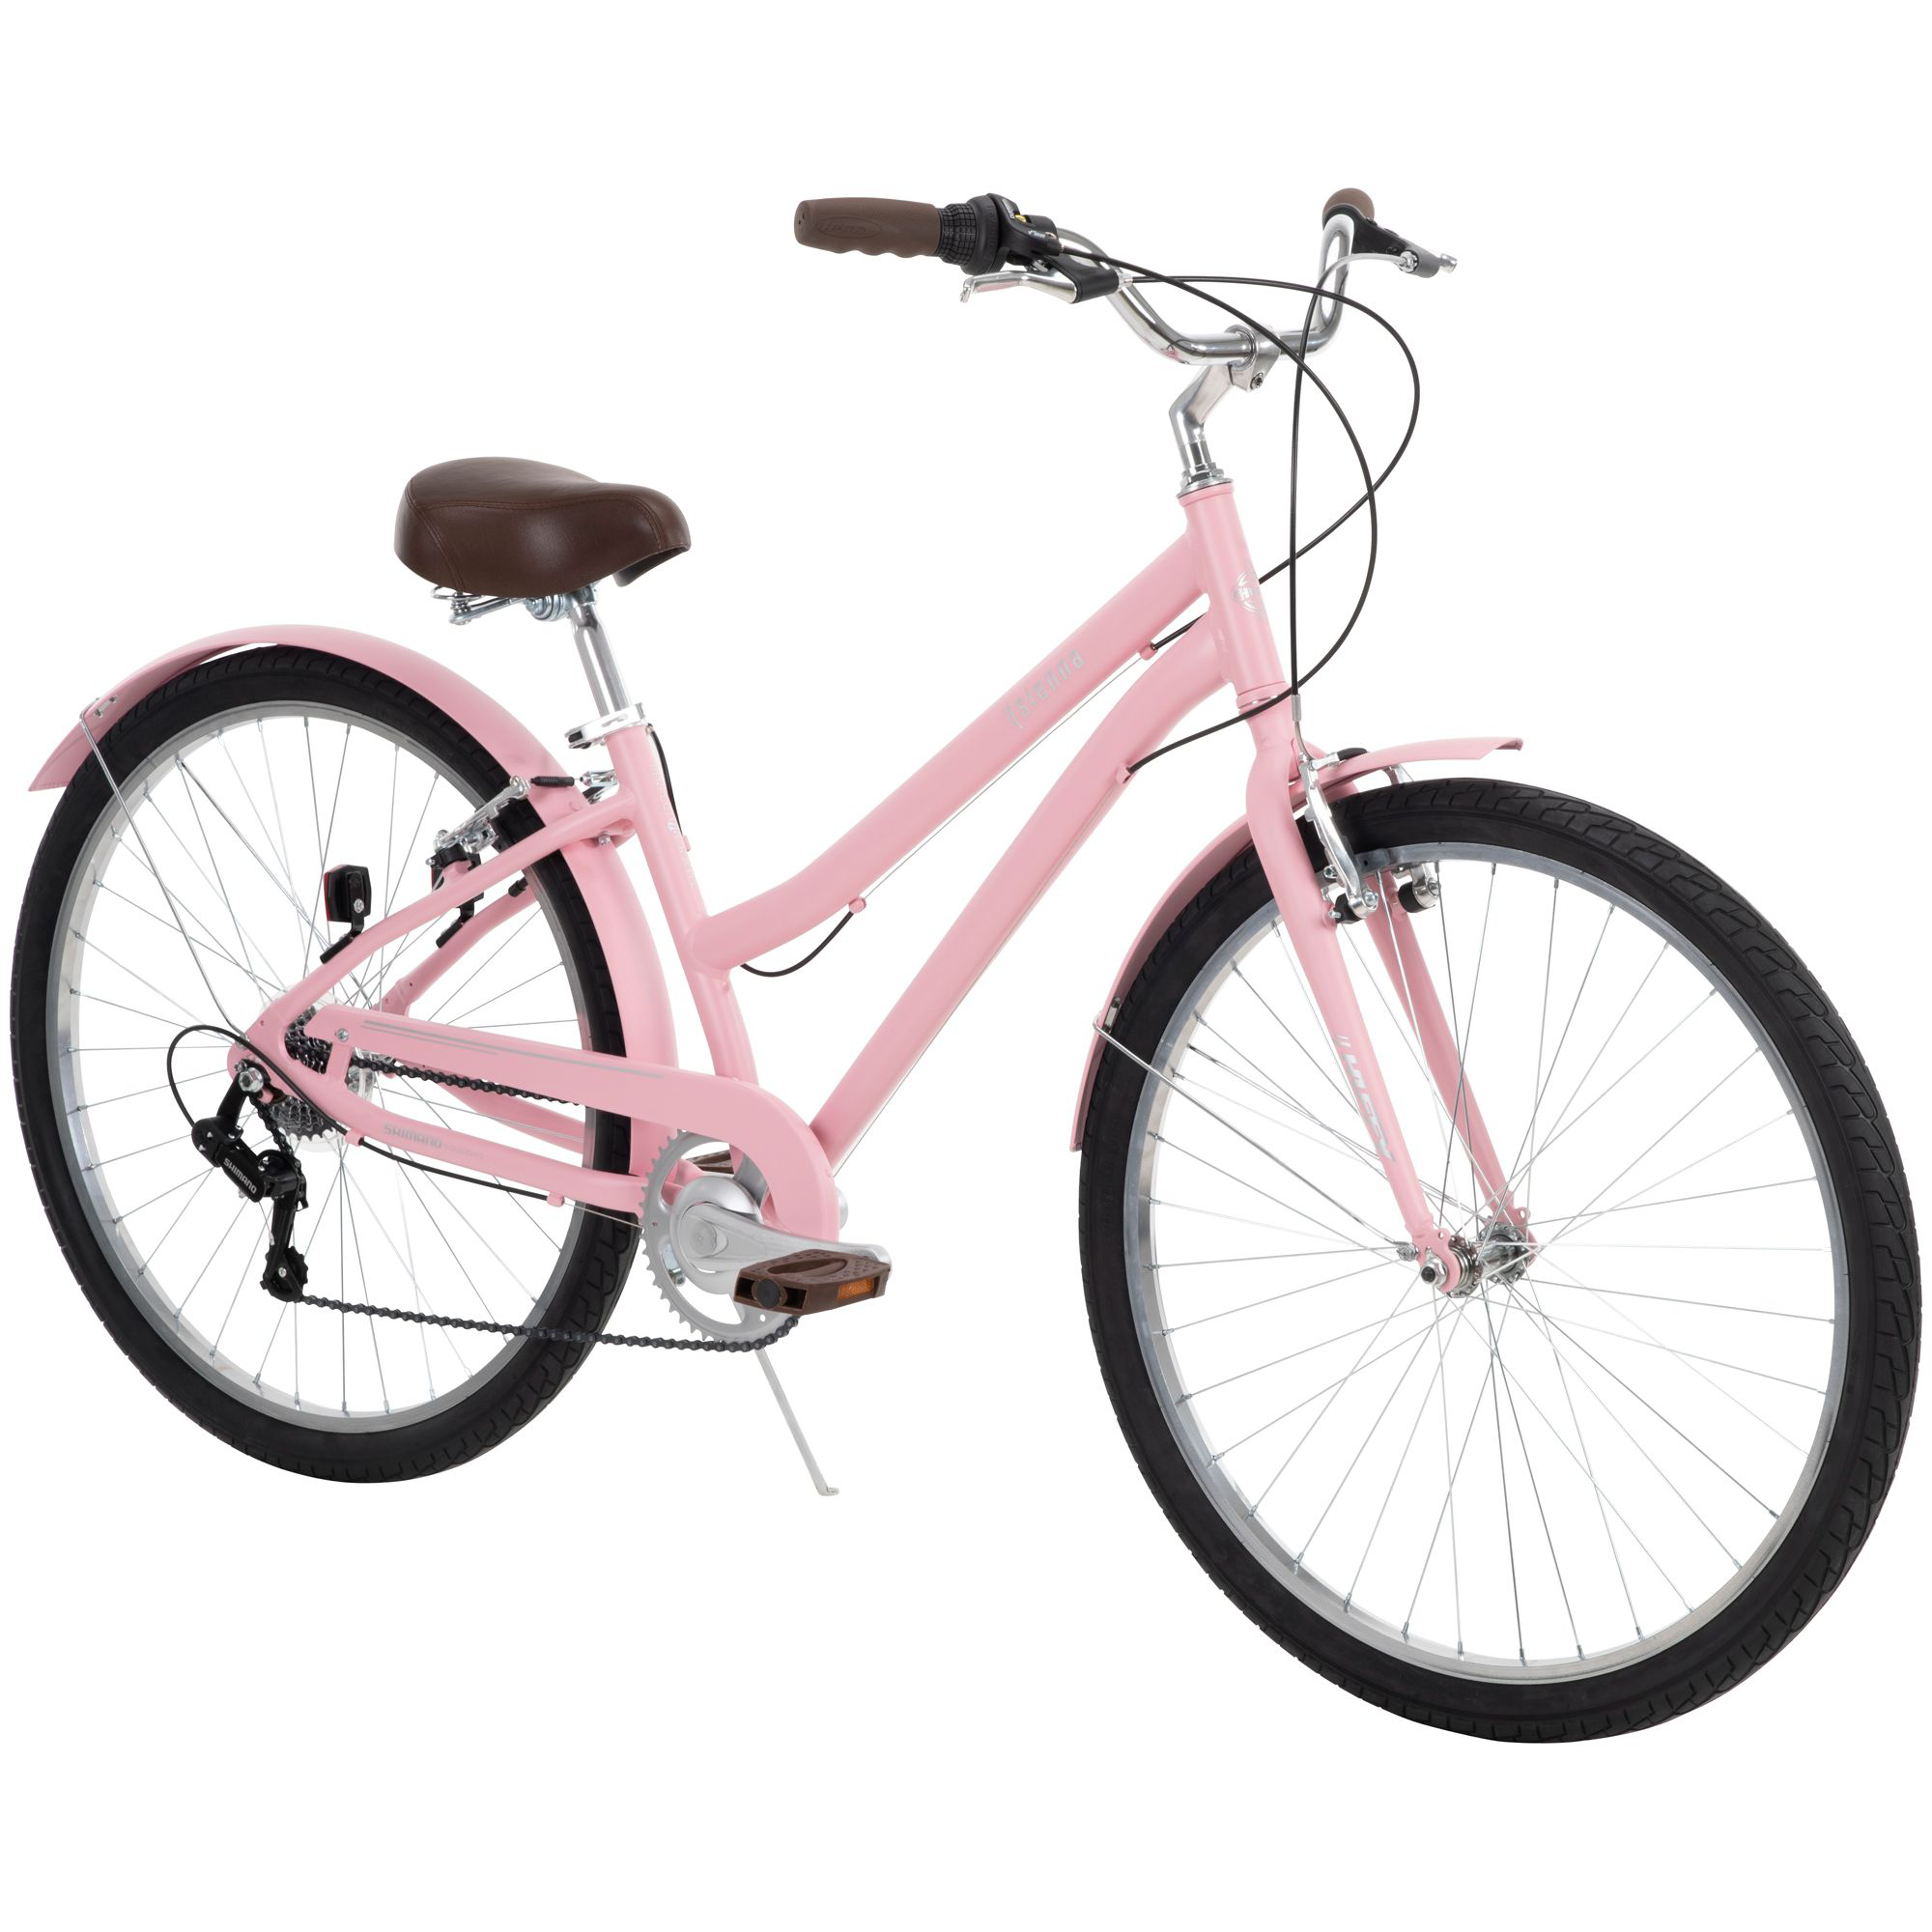 Huffy Sienna Comfort Bike with Step-Through Frame - Pink - Adult